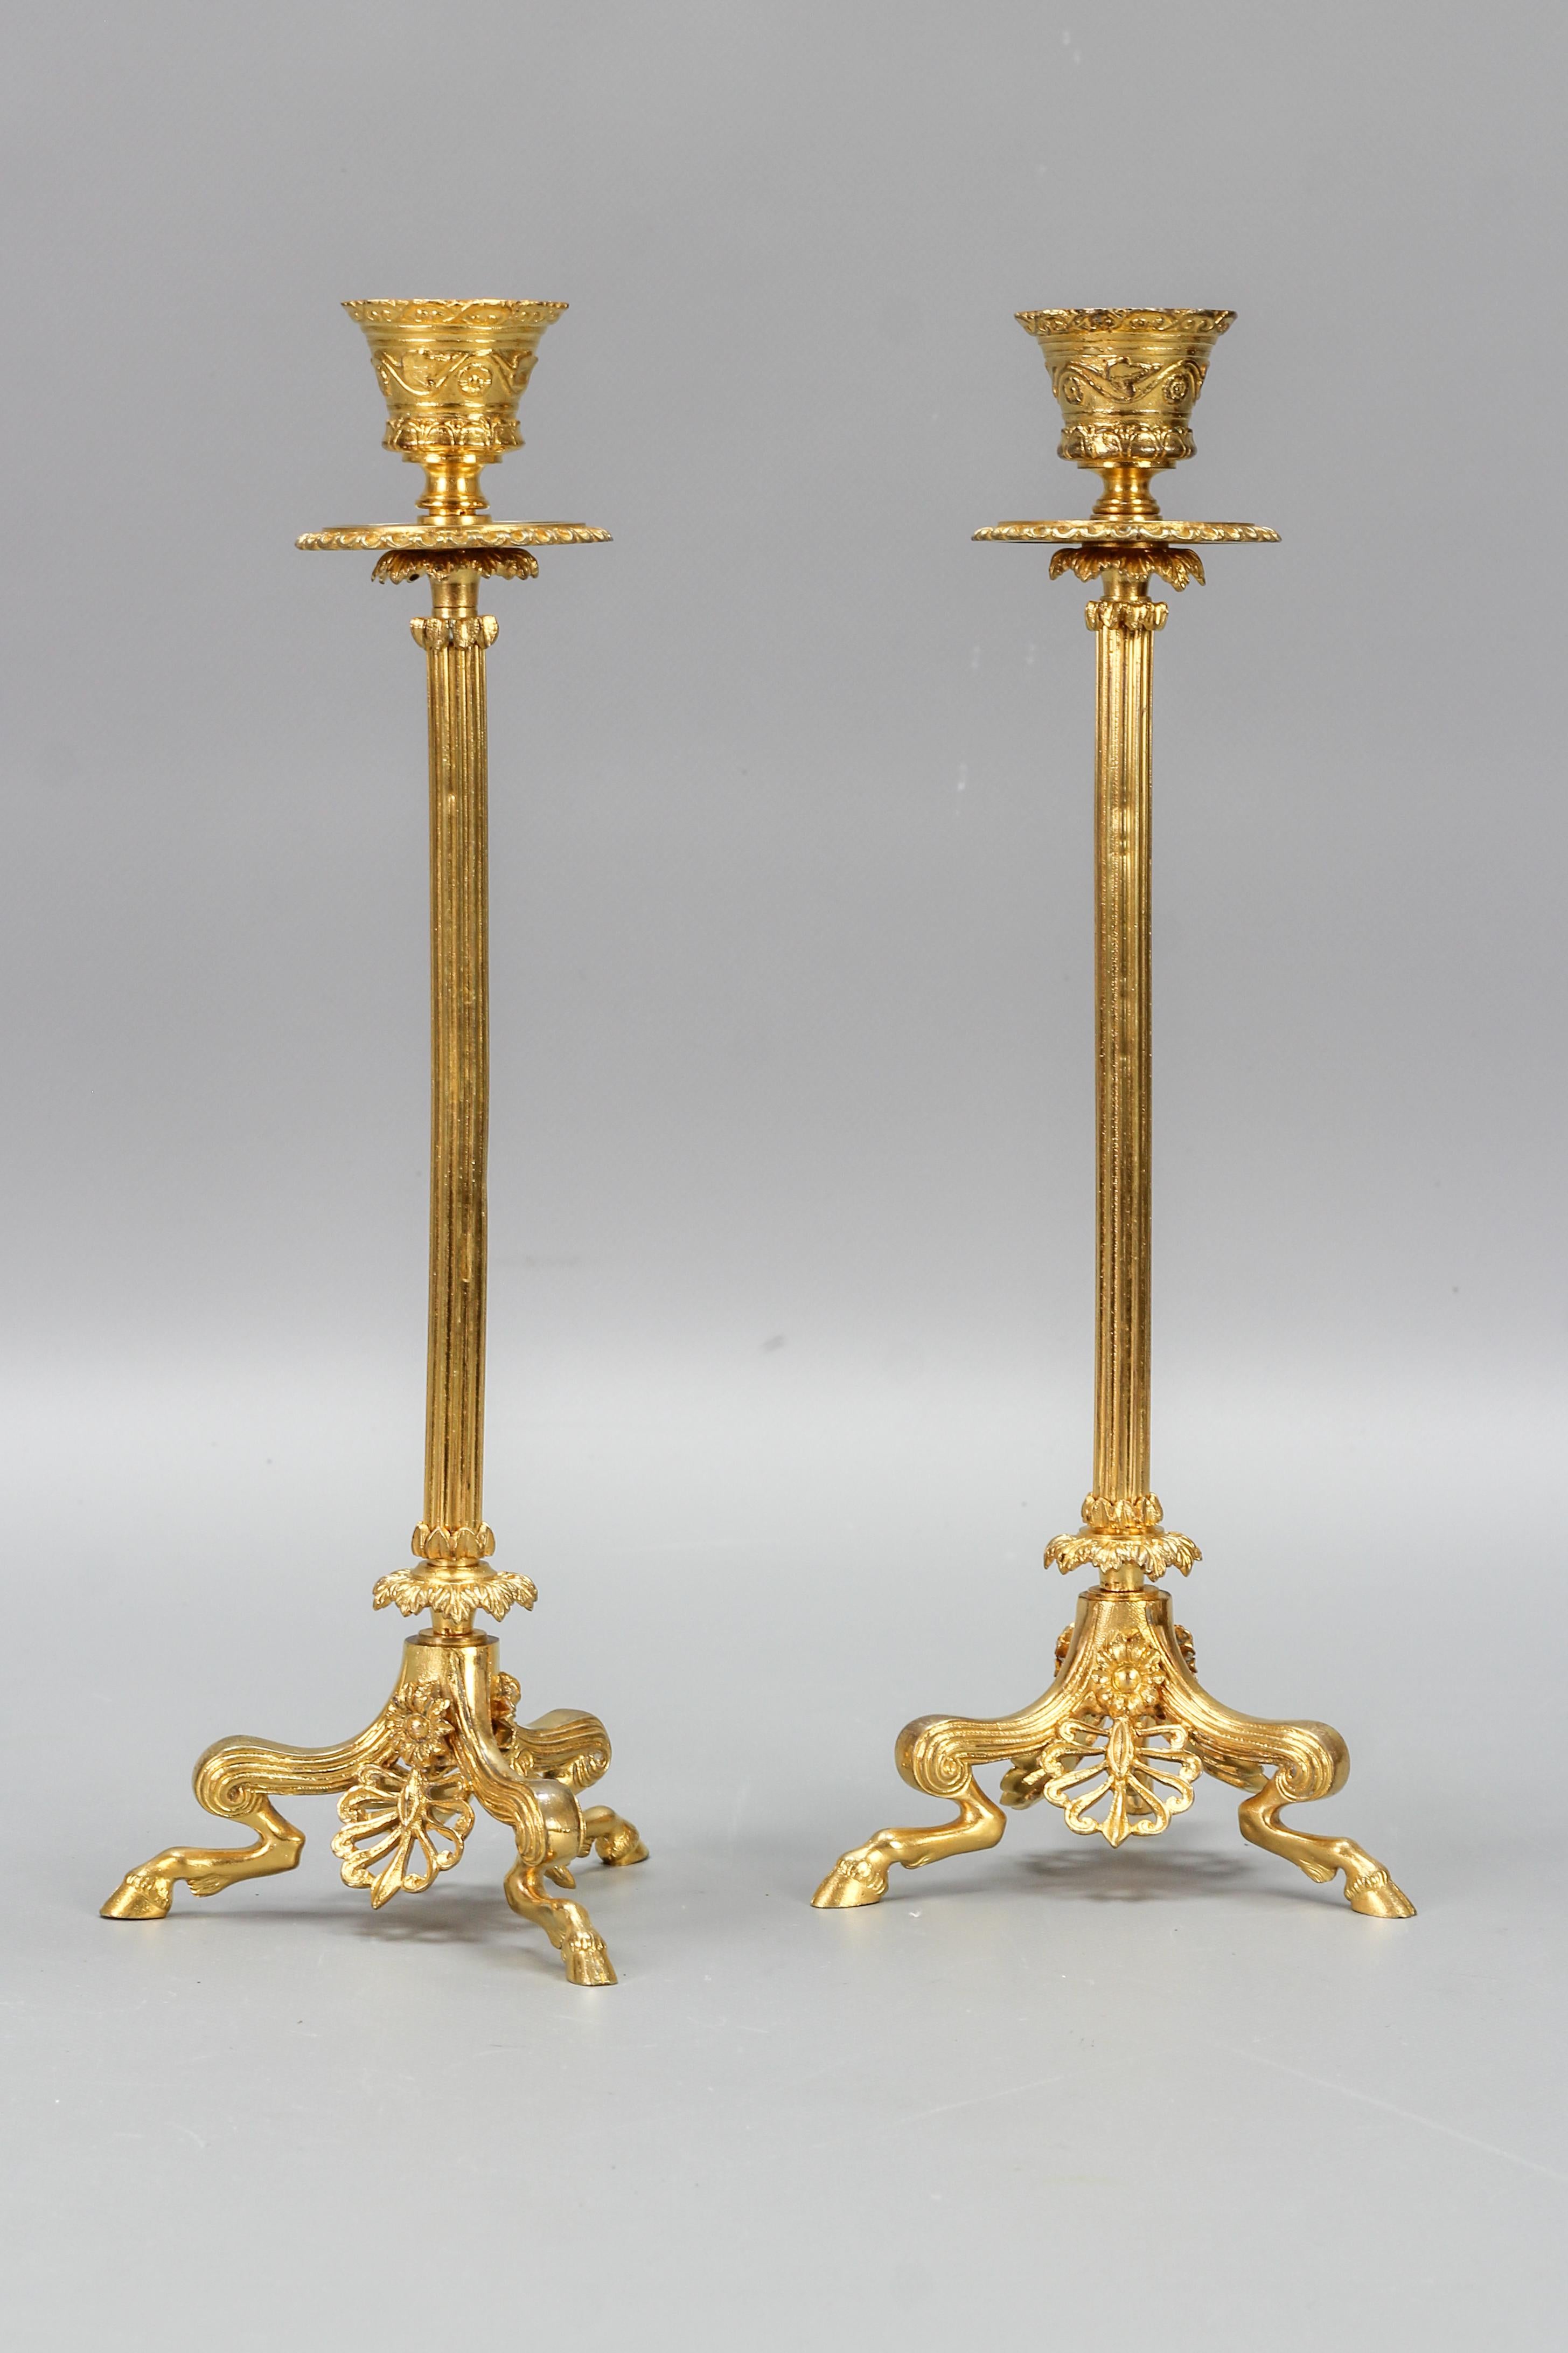 Late 19th Century Pair of French Empire Style Gilt Bronze Candlesticks on Hoofed Faun Feet For Sale